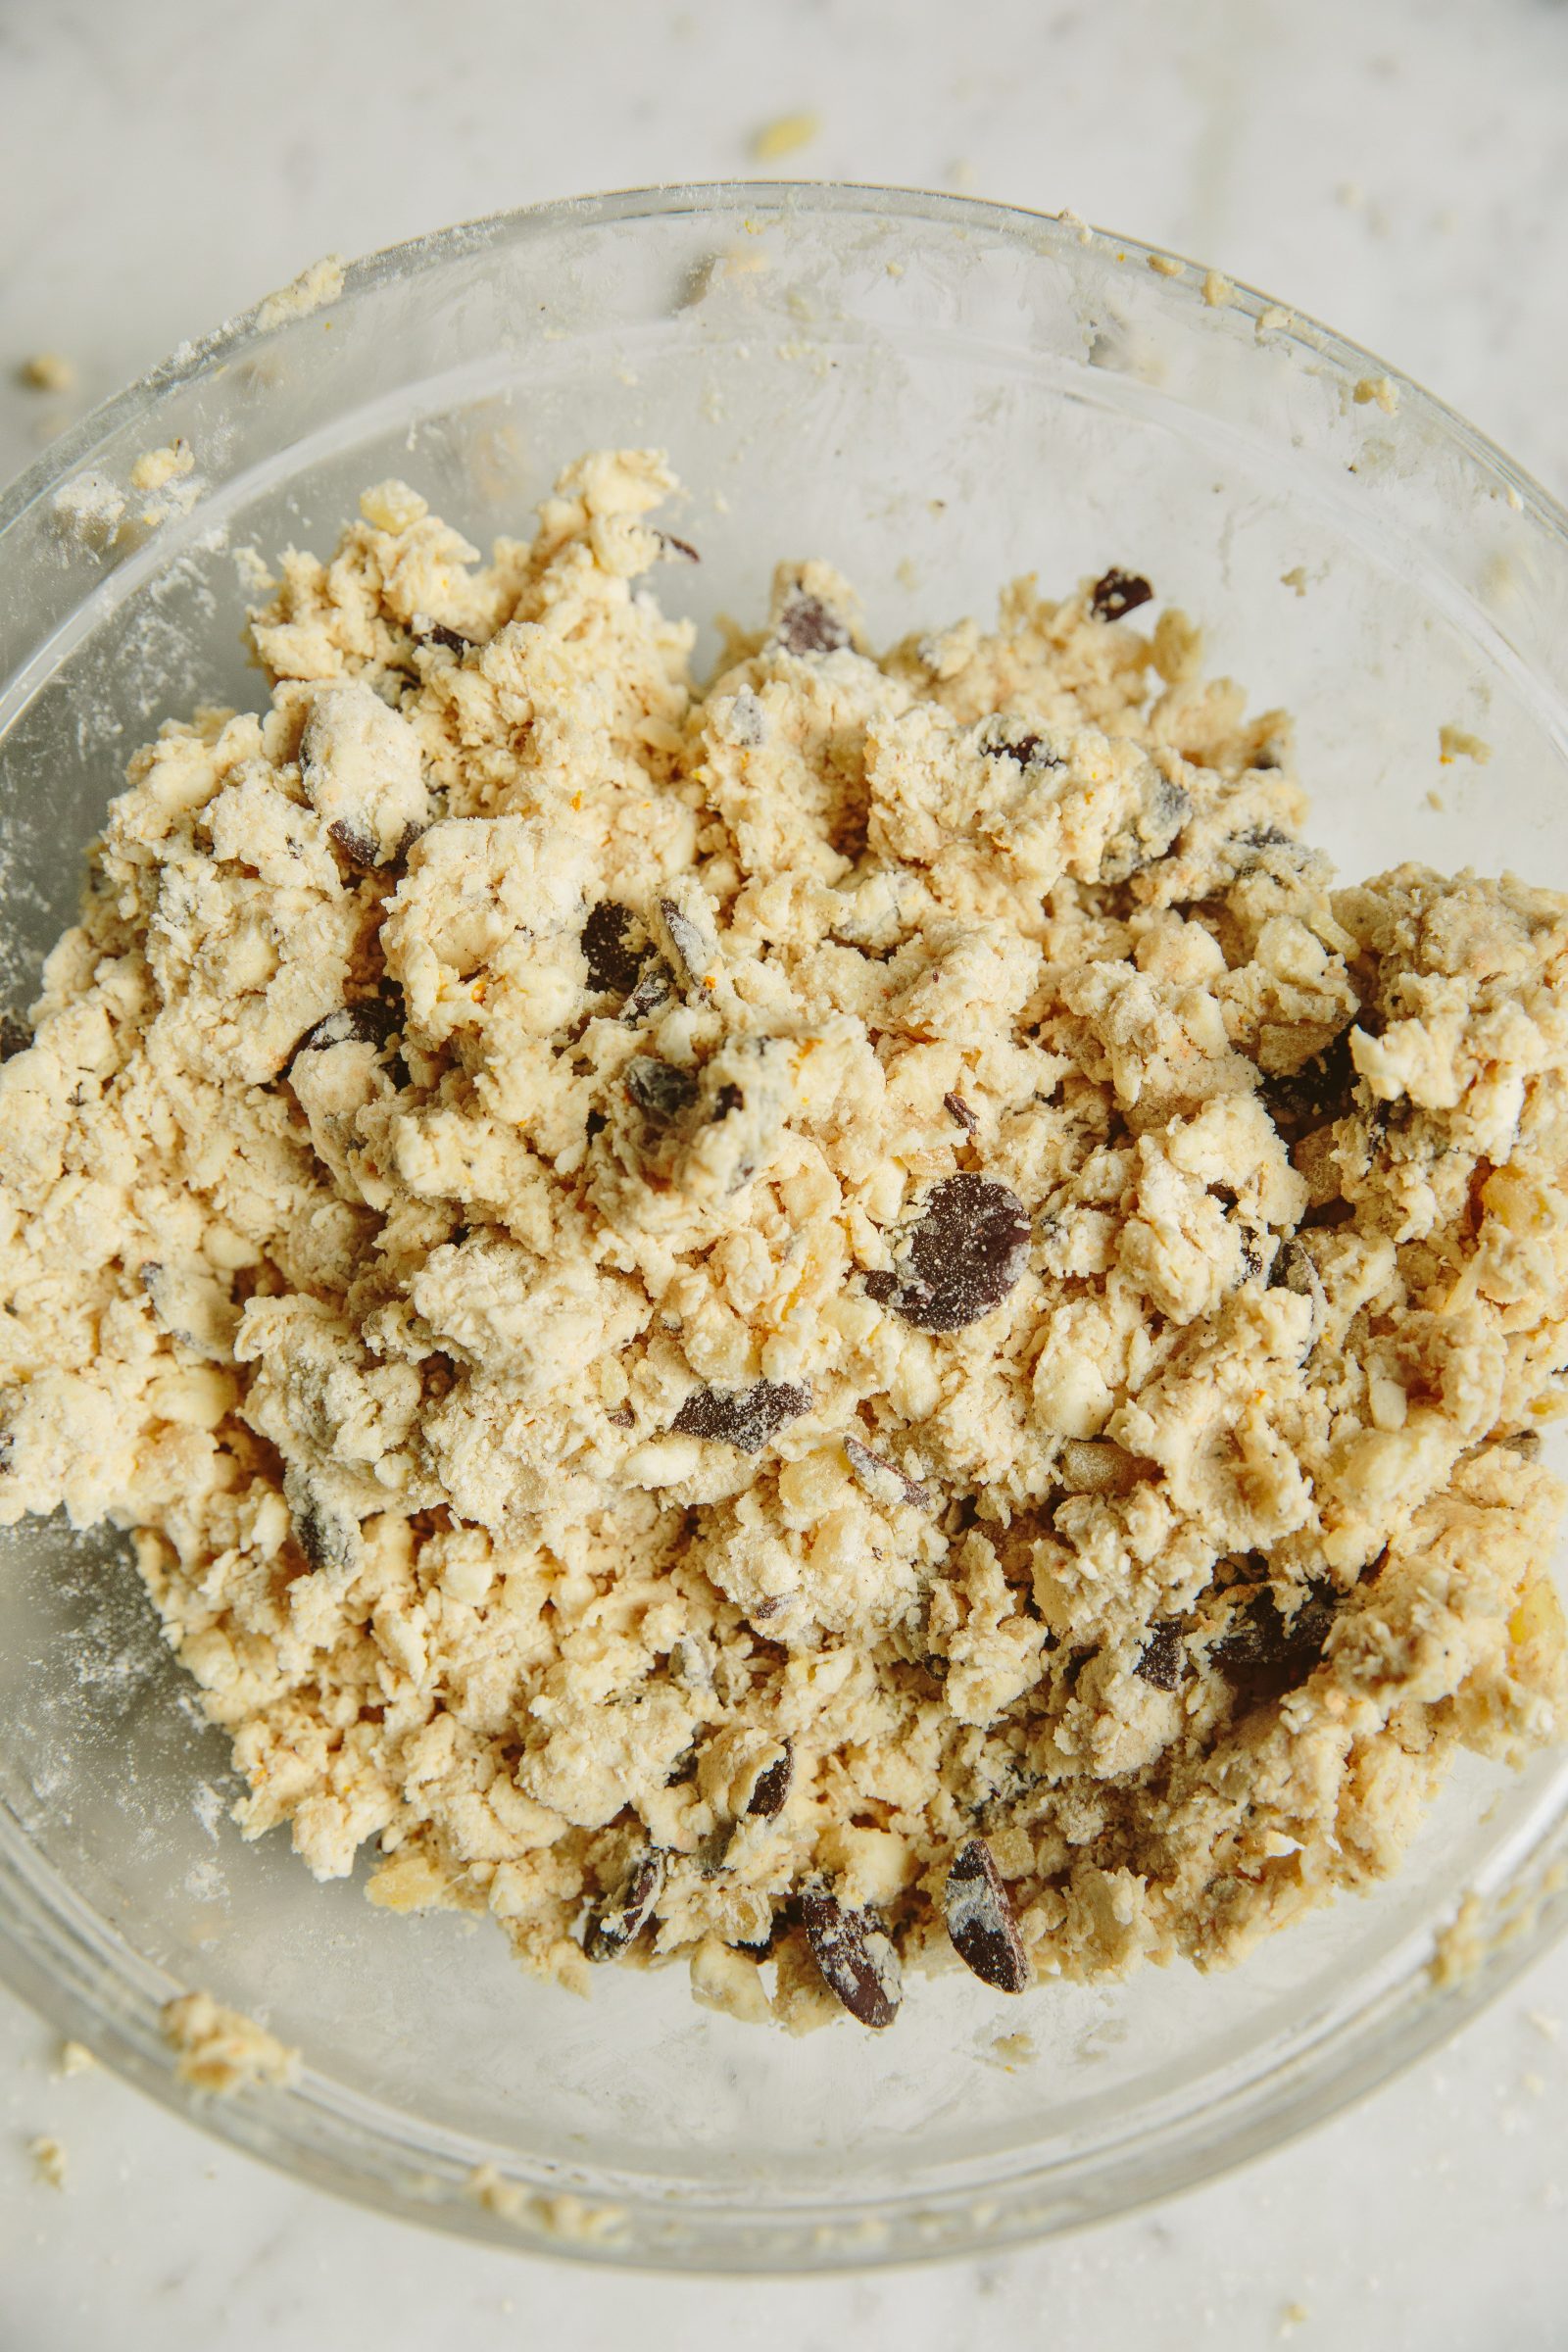 Triple Ginger Scones with Chocolate Chunks Step 2